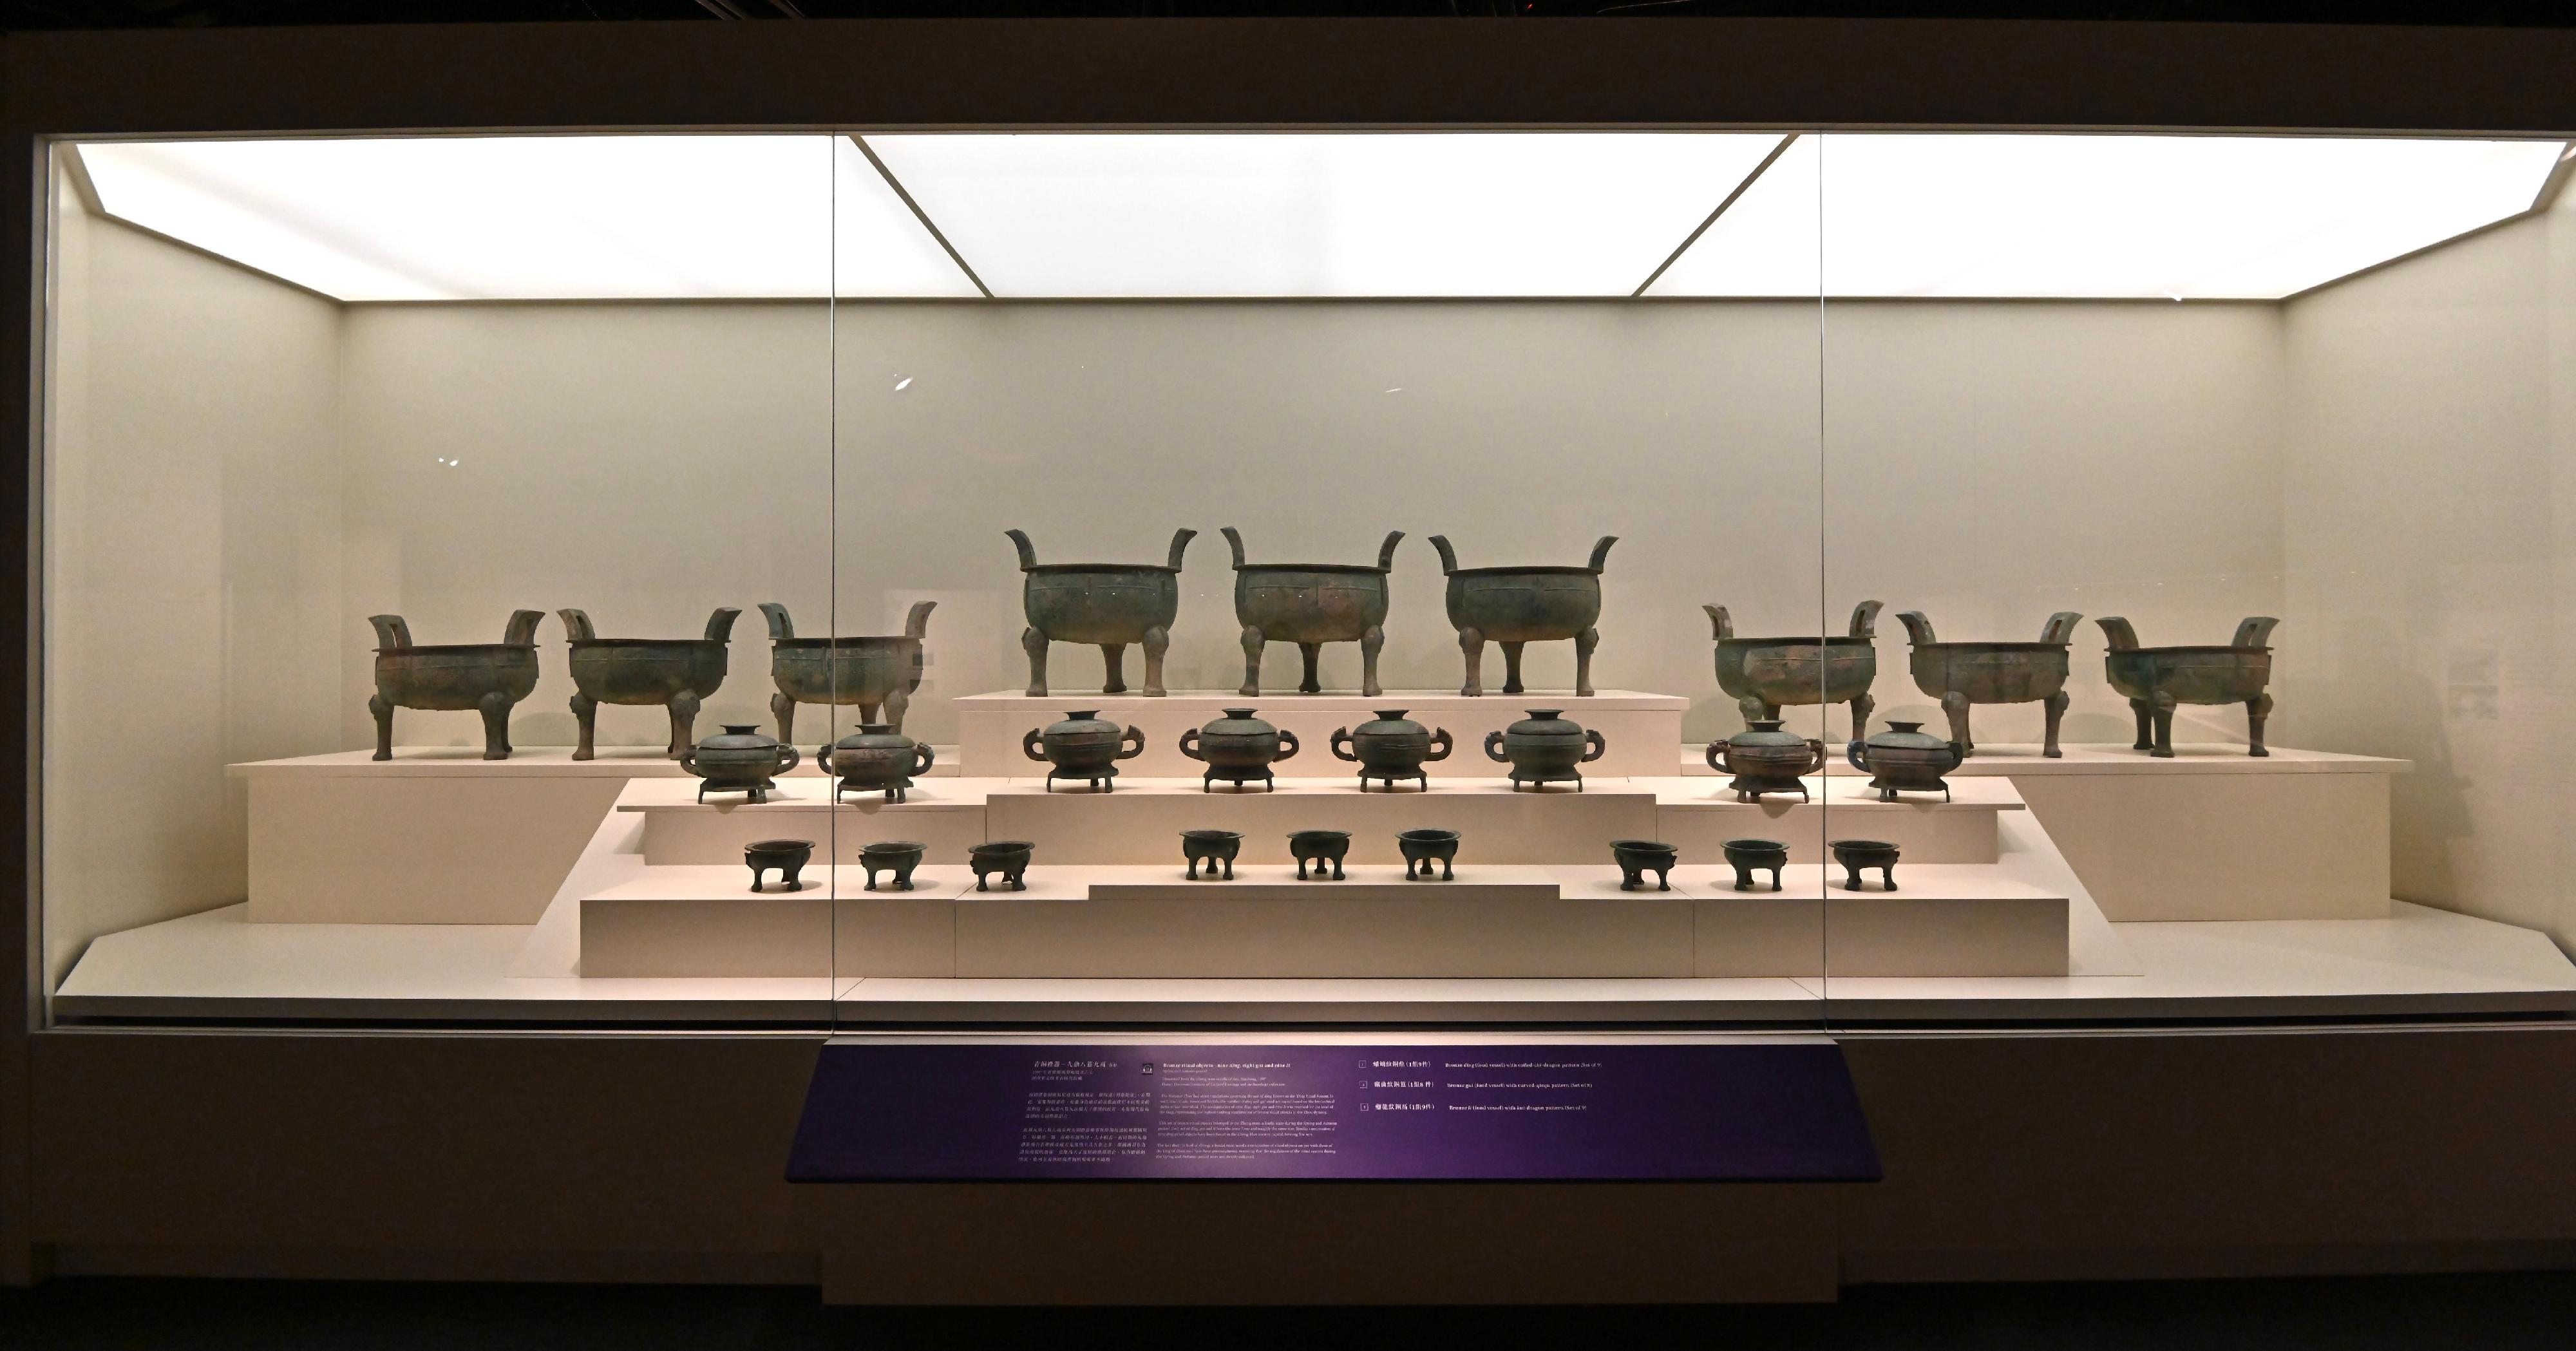 The Hong Kong Museum of History’s "The Hong Kong Jockey Club Series: The Ancient Civilisation of the Xia, Shang and Zhou Dynasties in Henan Province" exhibition will be open to the public from tomorrow (April 3). Photo shows bronze ritual objects - nine ding, eight gui and nine li from the Spring and Autumn period from a collection of the Henan Provincial Institute of Cultural Heritage and Archaeology, unearthed from the Zheng state sacrificial site in Xinzheng.